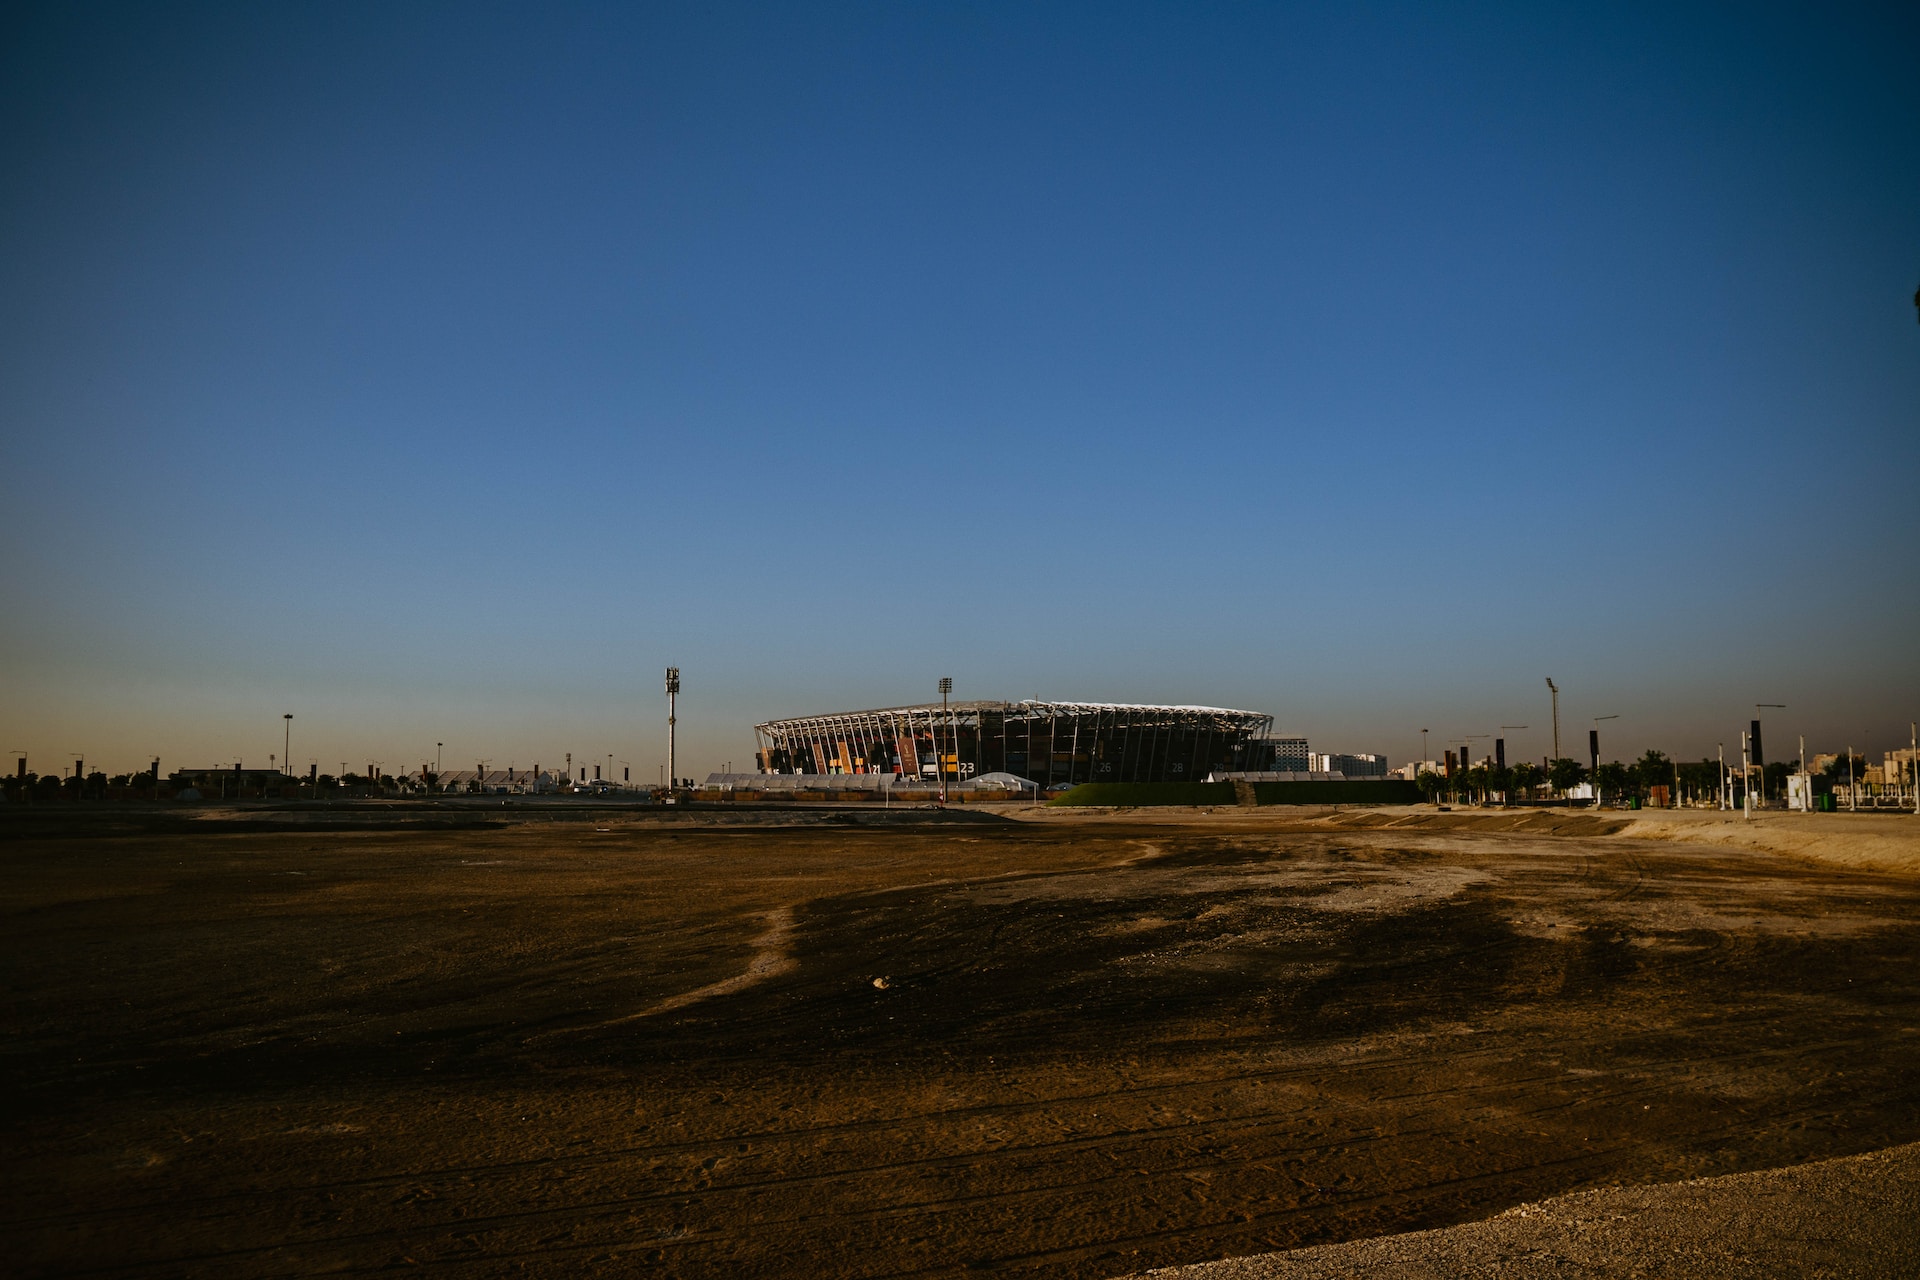 Qatar World Cup relying on flawed carbon offsets